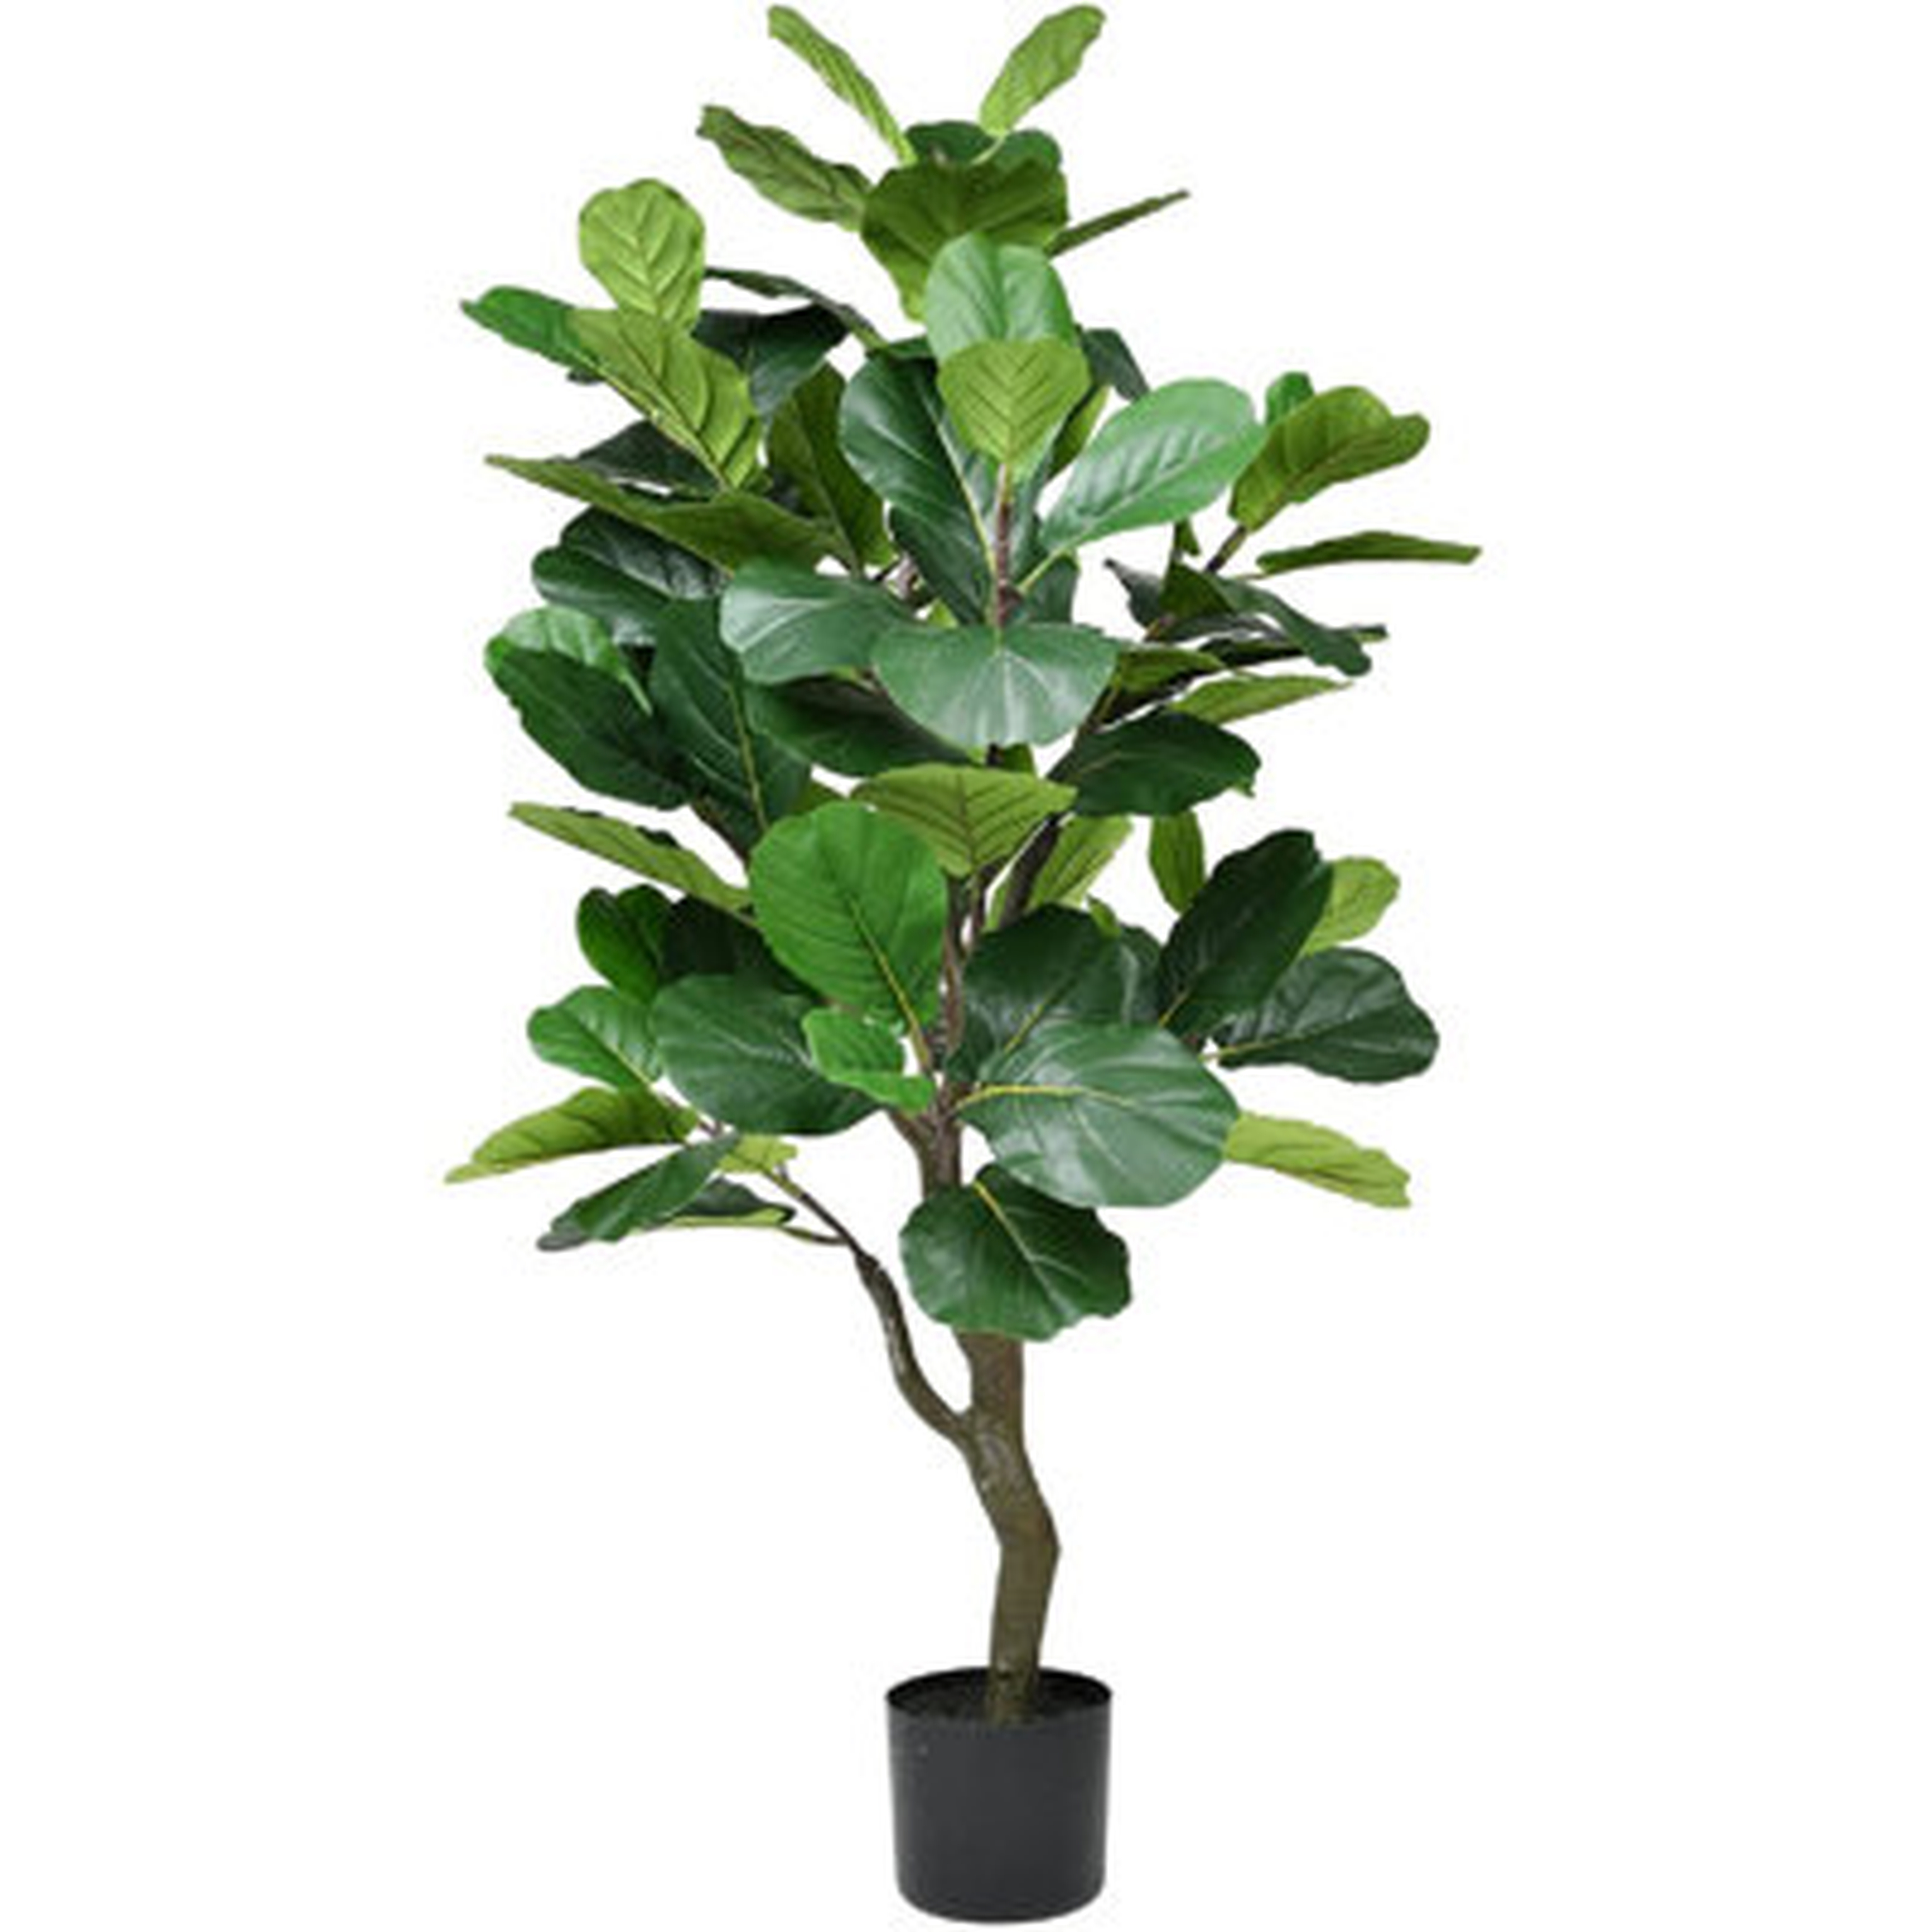 4.2Ft Artificial Plant Fiddle Leaf Fig Tree Fake Tree In Pot Natural Faux Tree Ficus Lyrata Greenery Plant Indoor Outdoor Decor For House Home Office - Wayfair